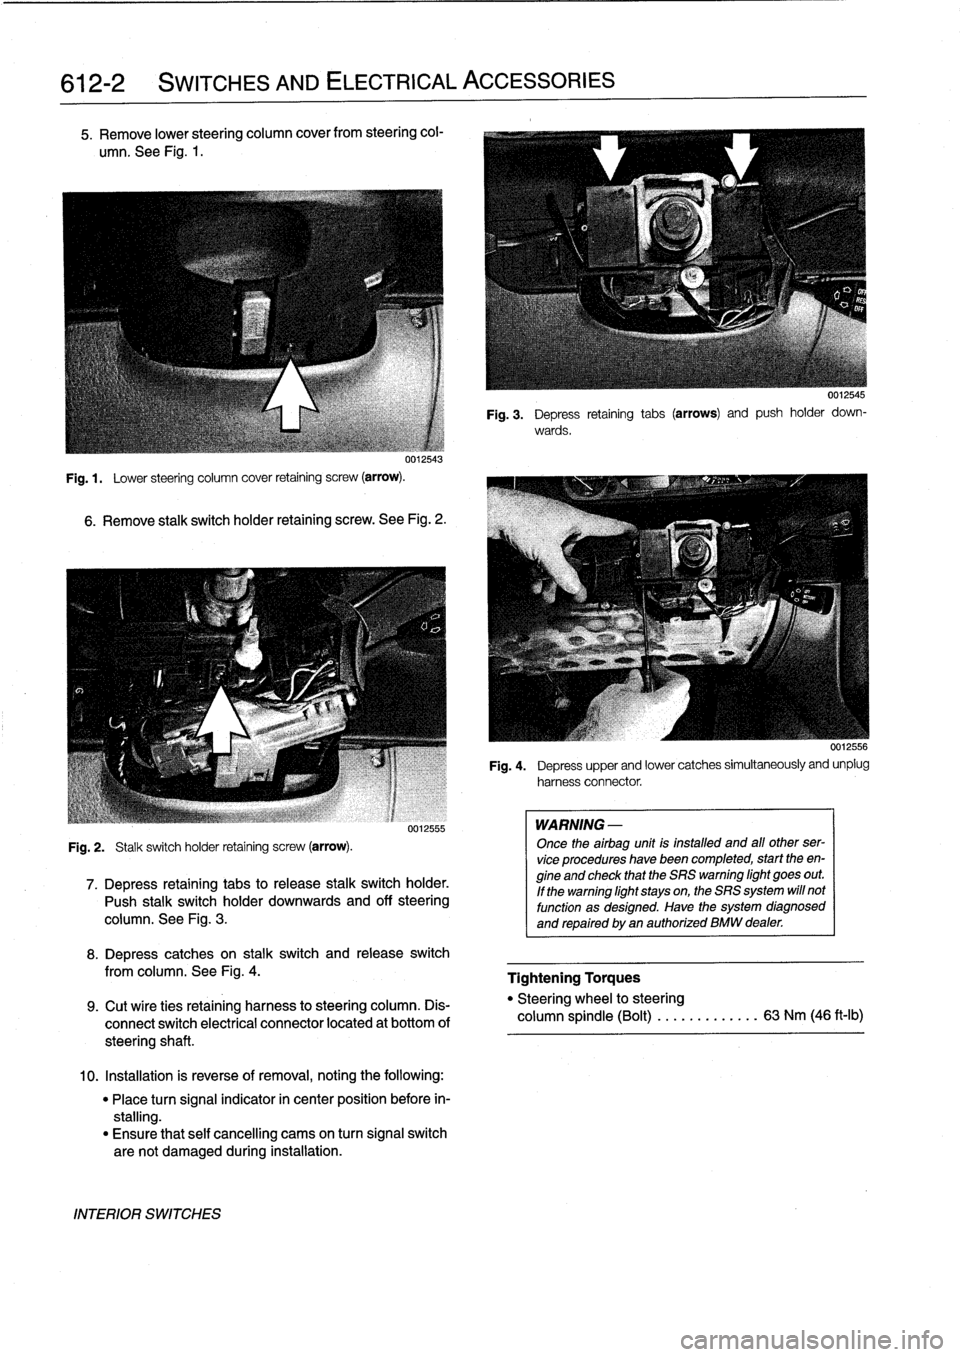 BMW 325i 1996 E36 Owners Manual 
612-2

	

SWITCHES
AND
ELECTRICAL
ACCESSORIES

5
.
Remove
lower
steering
column
cover
from
steering
col-

umn
.
See
Fig
.
1
.

uu12543

Fig
.
1
.

	

Lower
steering
column
cover
retaining
screw
(arro